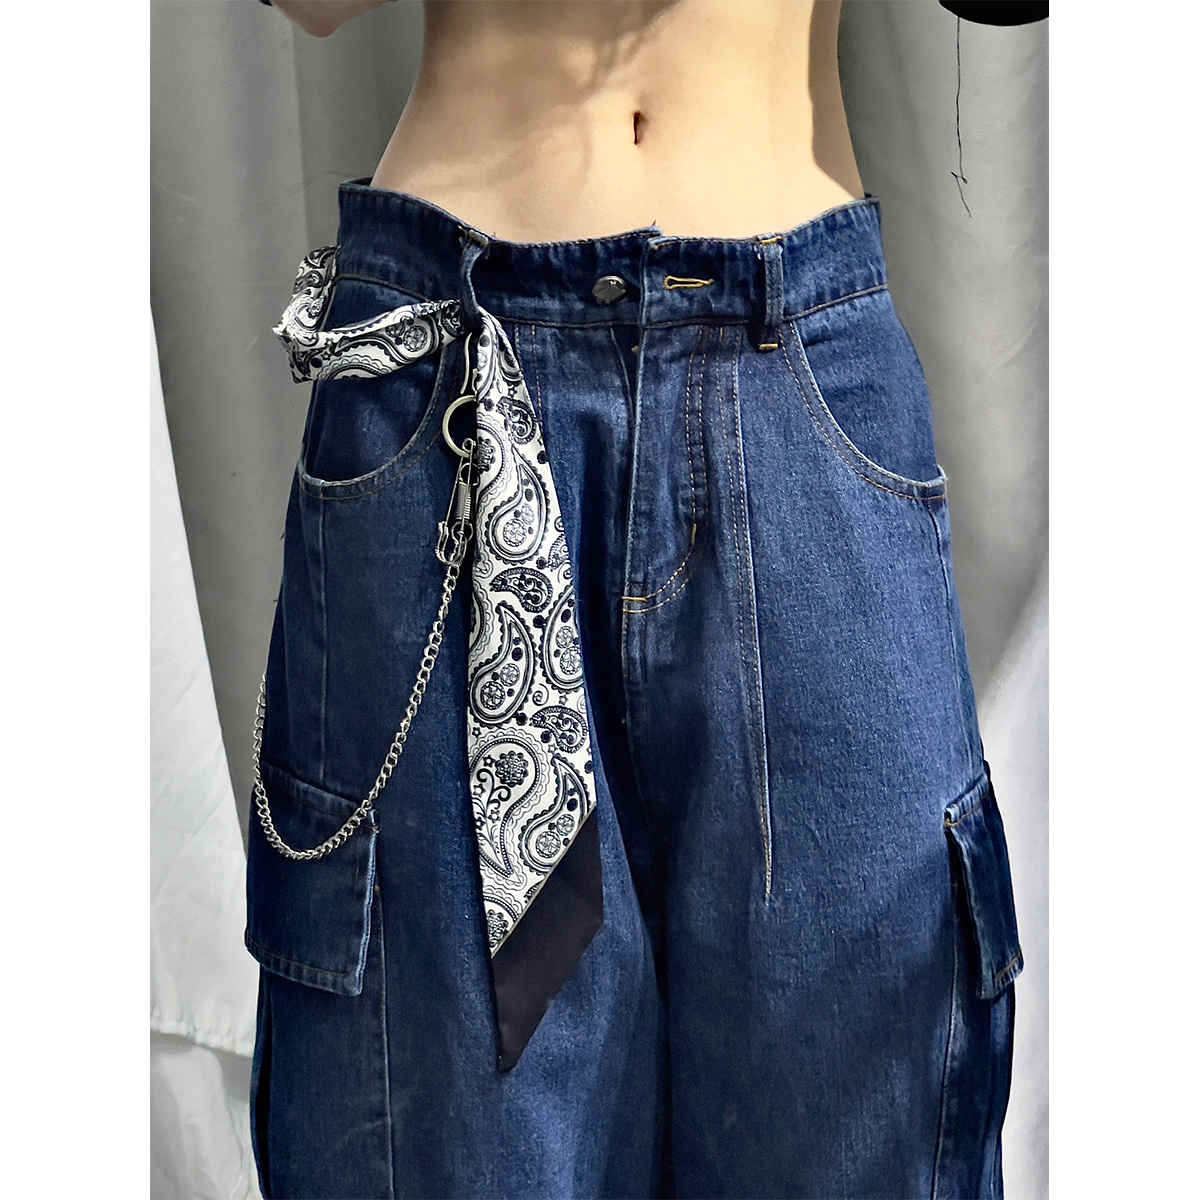 Chain Detail Cargo Pants Korean Street Fashion Pants By Made Extreme Shop Online at OH Vault